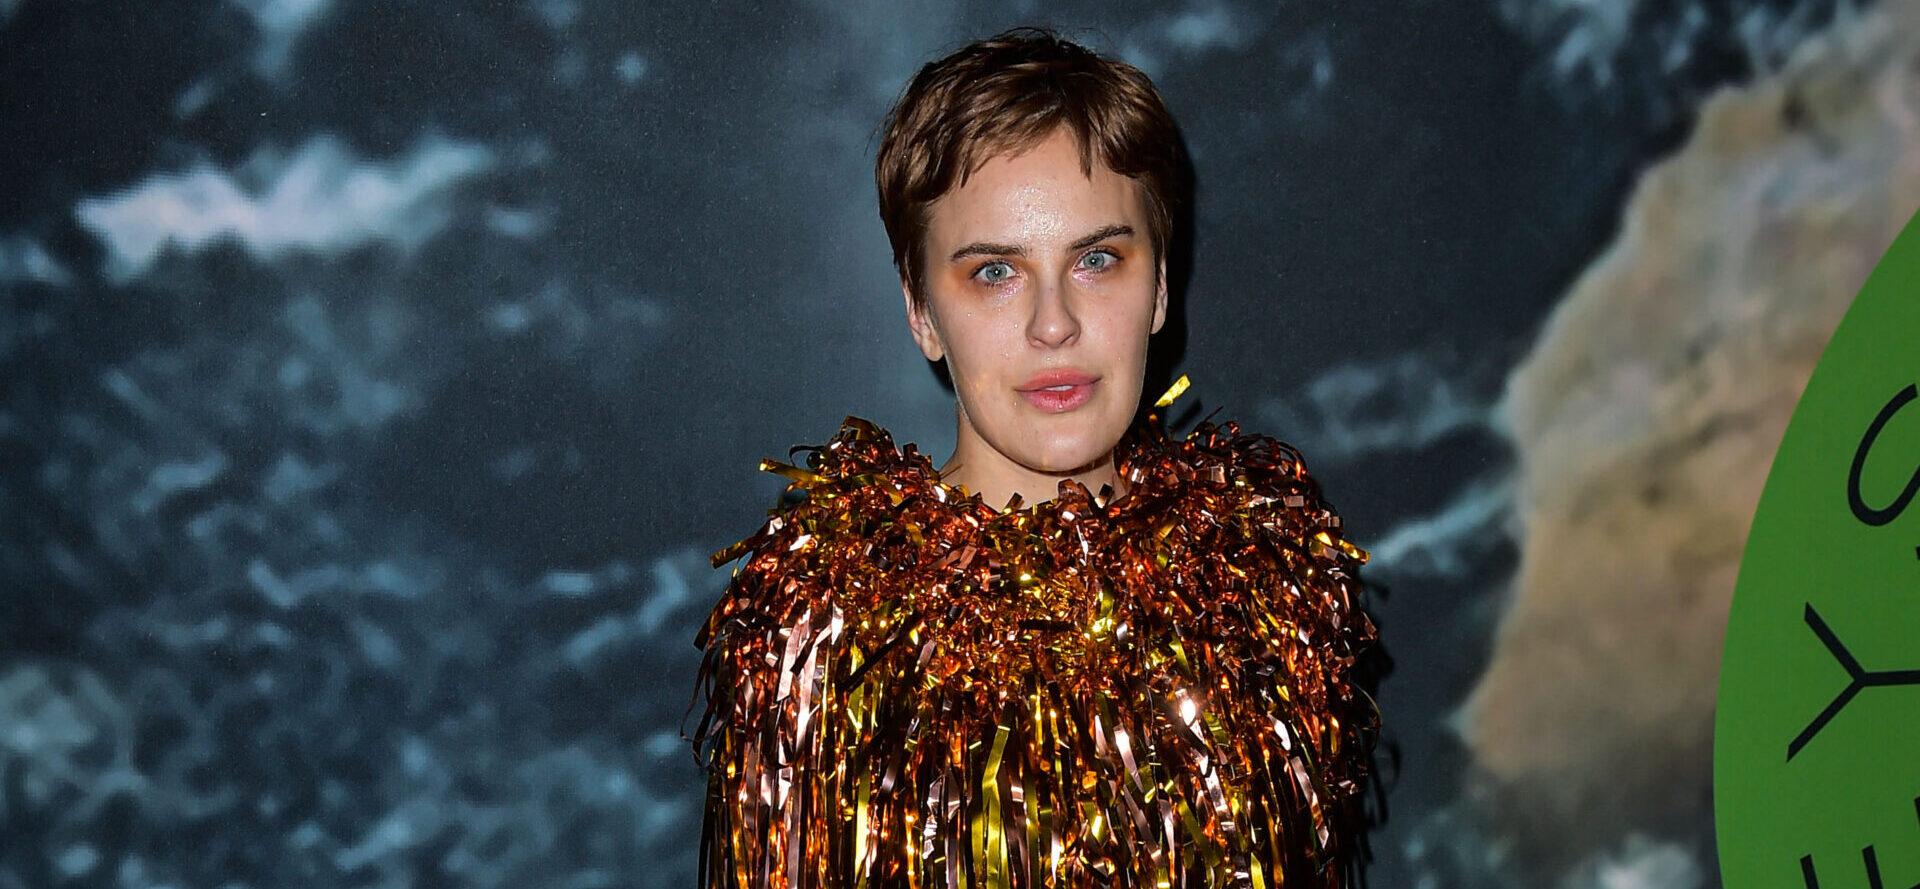 Tallulah Willis Opens Up About Her Mental Health Journey And Borderline Personality Disorder Diagnosis